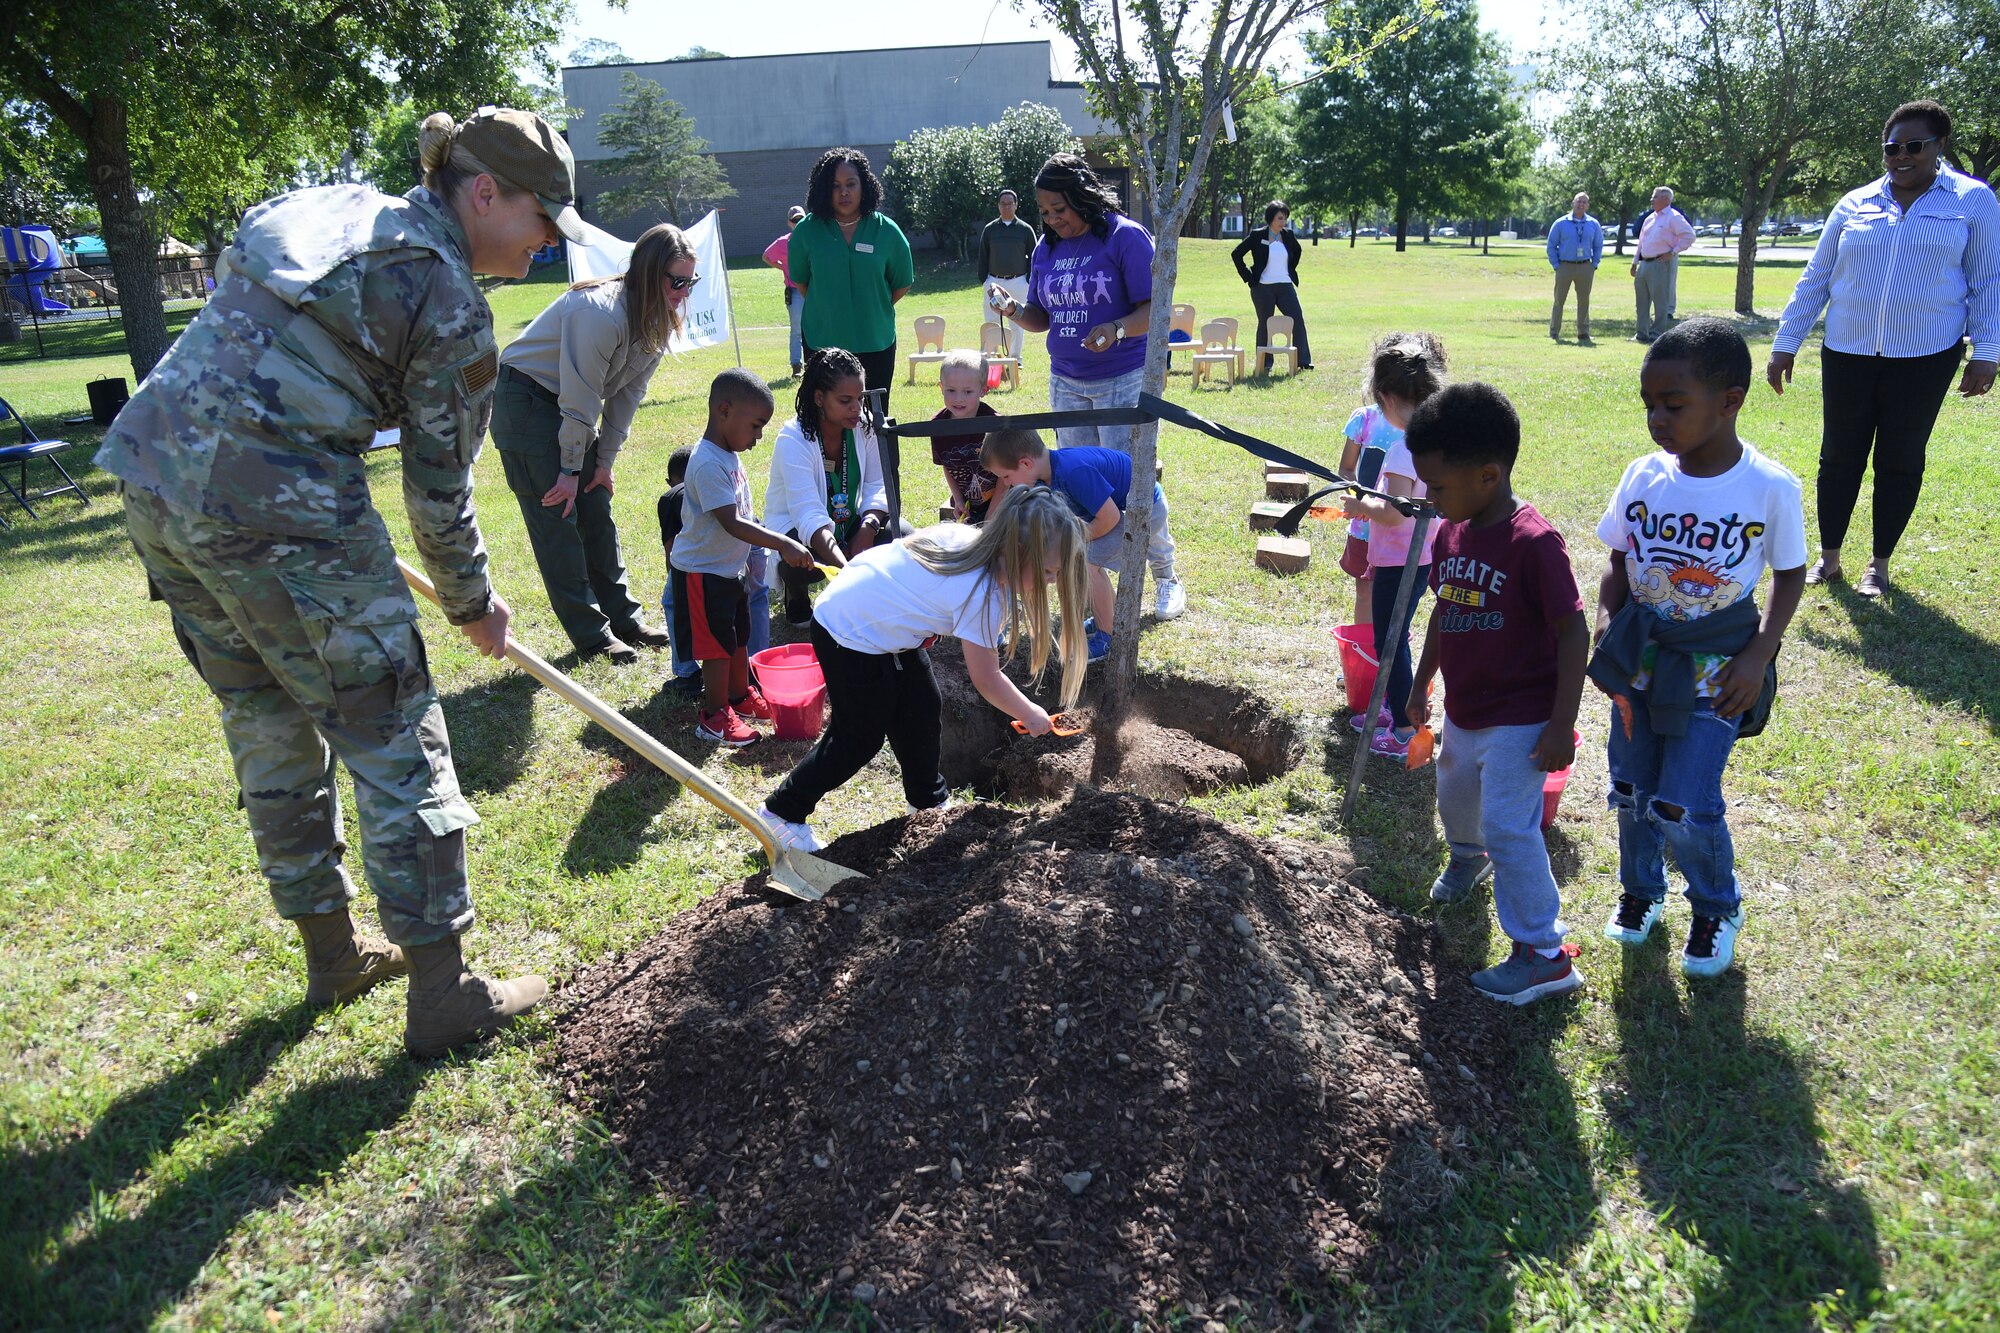 U.S. Air Force Chief Master Sgt. Sarah Esparza, 81st Training Wing command chief, and children from the Keesler Child Development Center participate in a tree planting ceremony during the Arbor Day Celebration at Keesler Air Force Base, Mississippi, April 28, 2022. A Tree City USA flag presentation also took place at the event. (U.S. Air Force photo by Kemberly Groue)